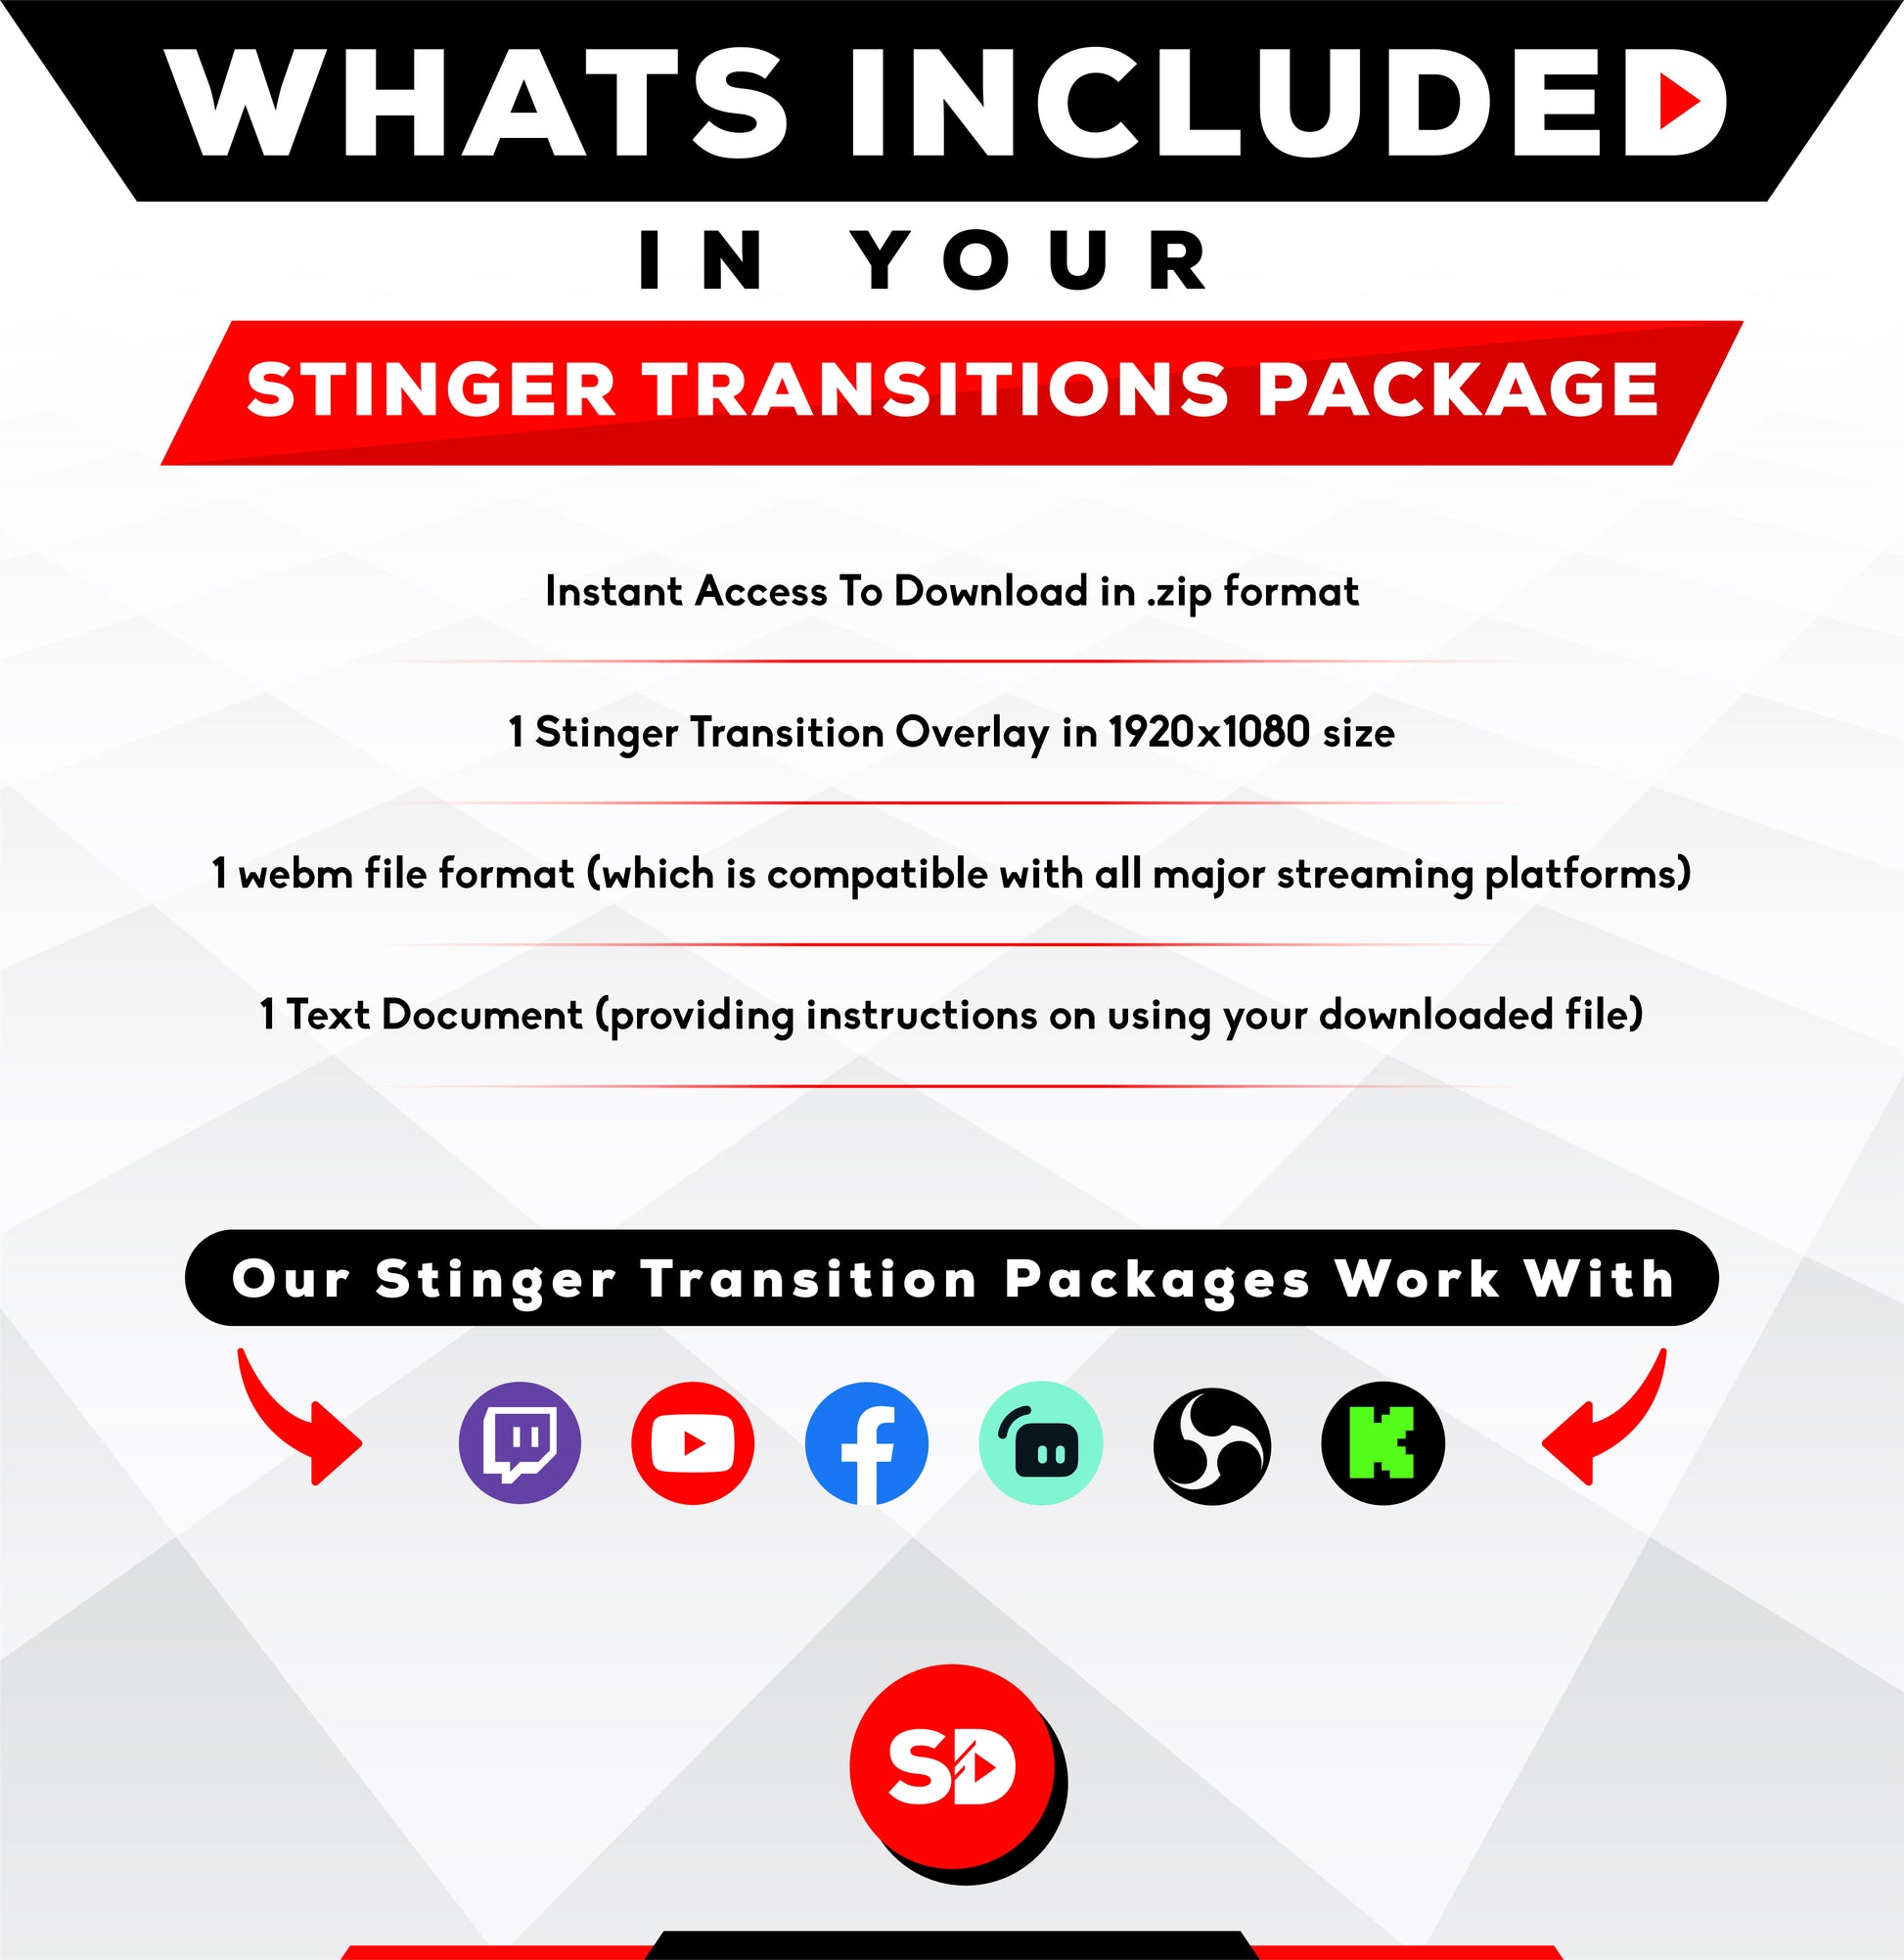 whats included in your package - stream designz - stinger transition - sleek yellow and red